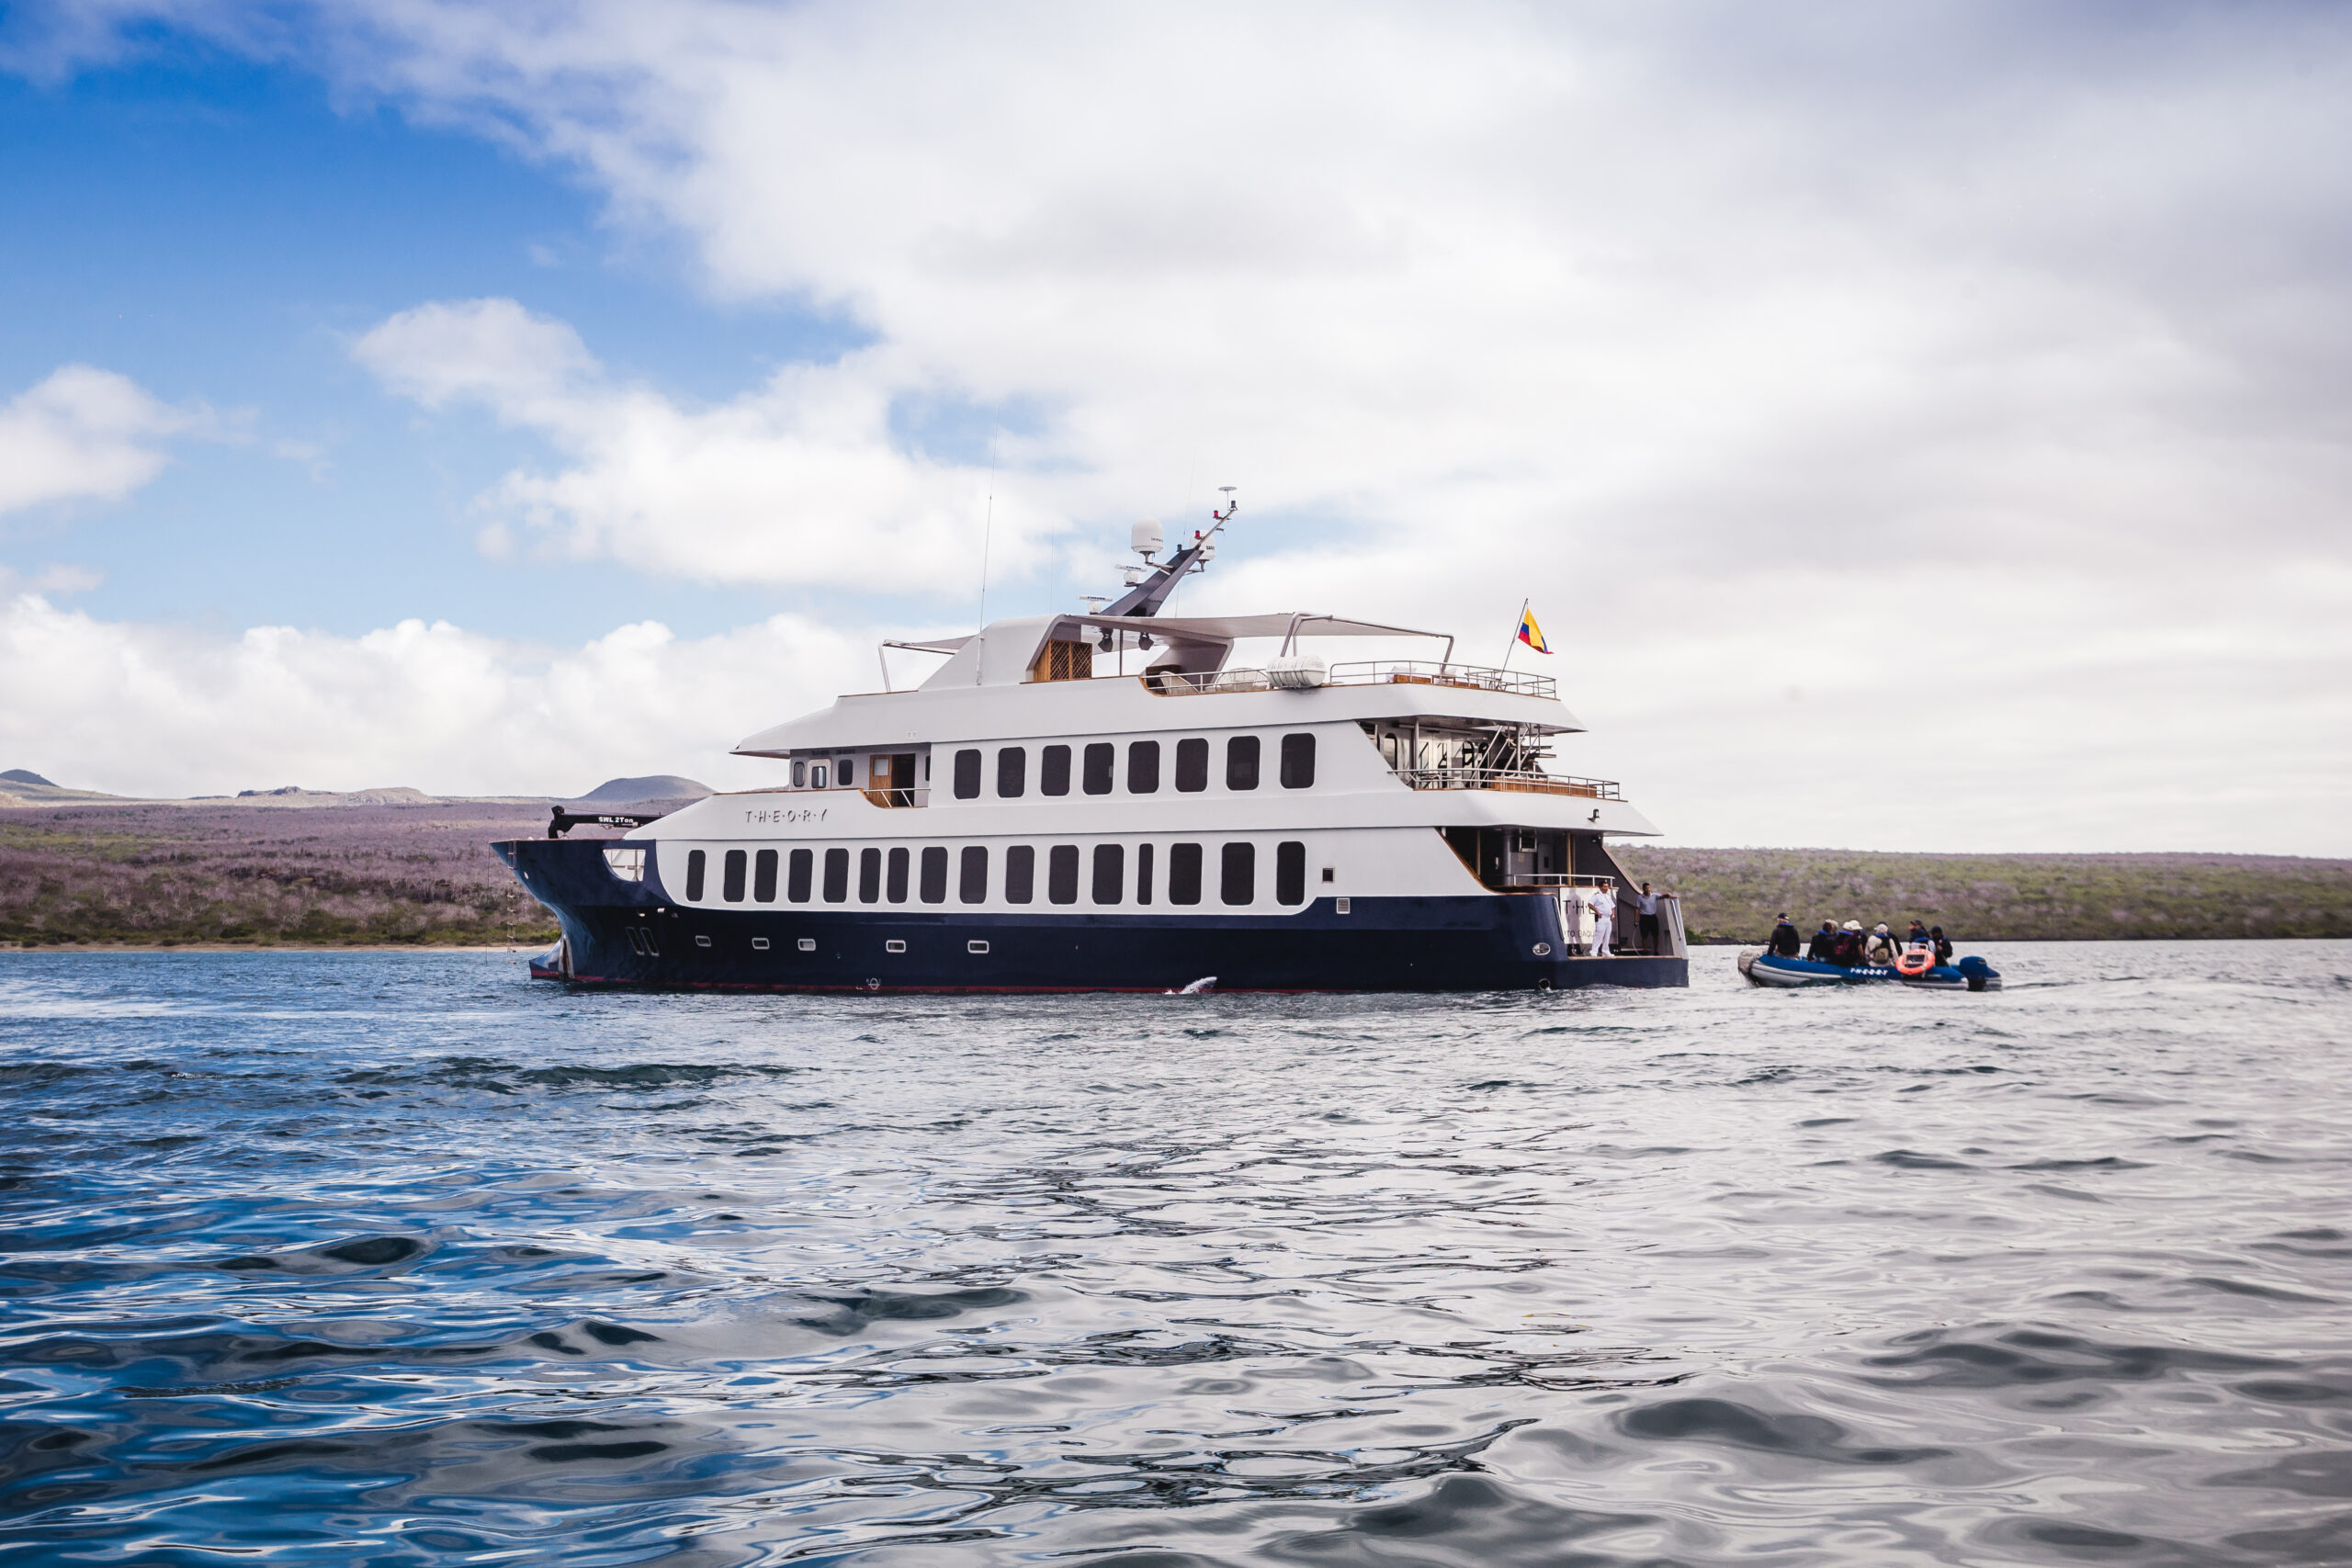 Galapagos Cruise with Ecoventura on Theory